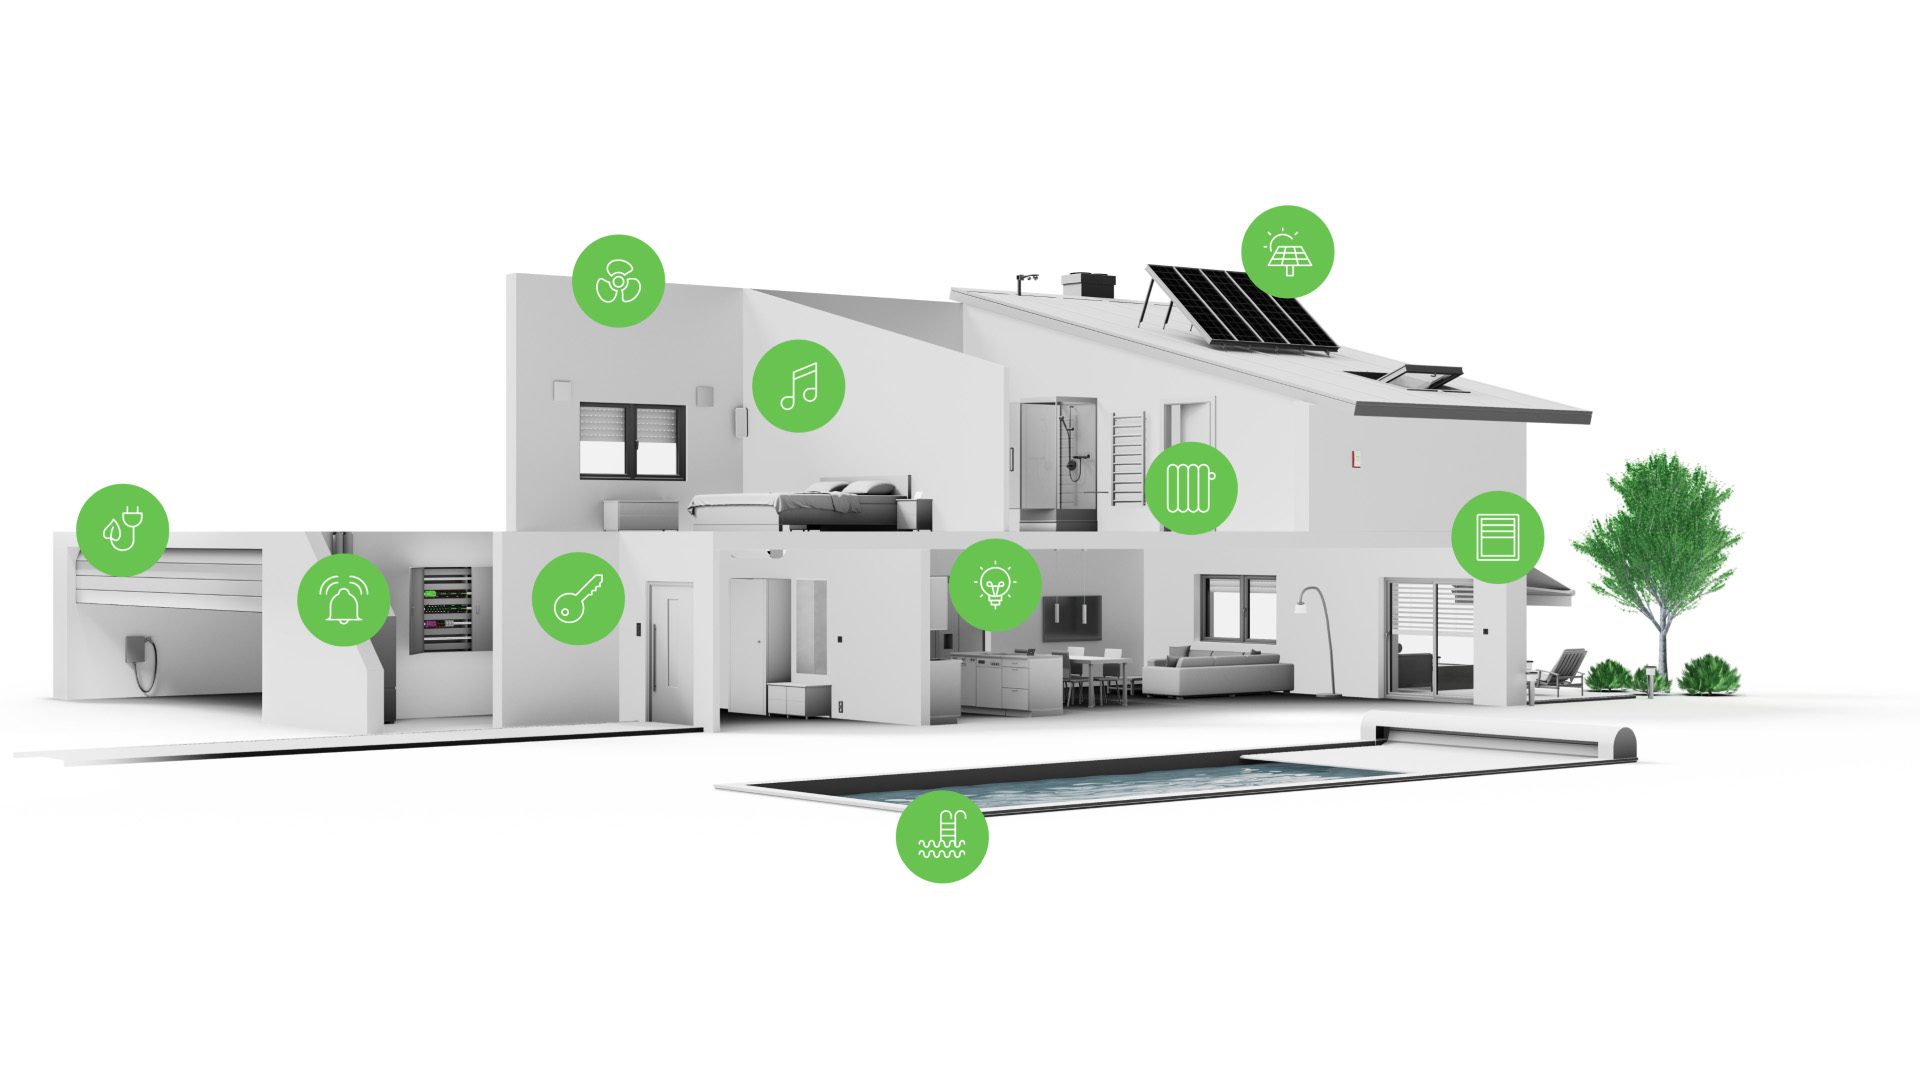 What Are The Advantages And Disadvantages Of A Smart Home